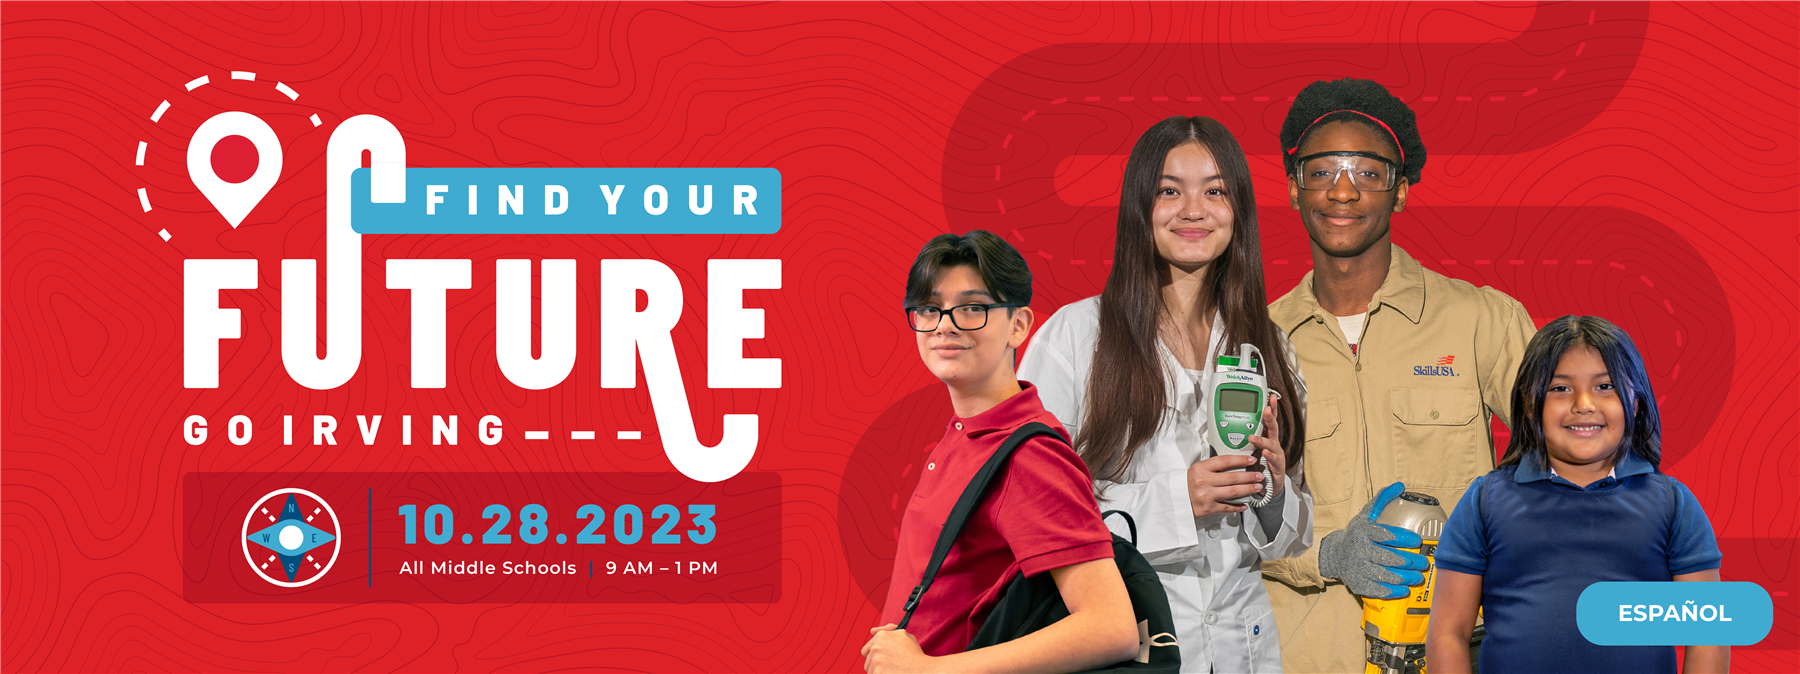 Go Irving: Find Your Future - 10-28-23 - All Middle Schools | 9 AM - 1 PM